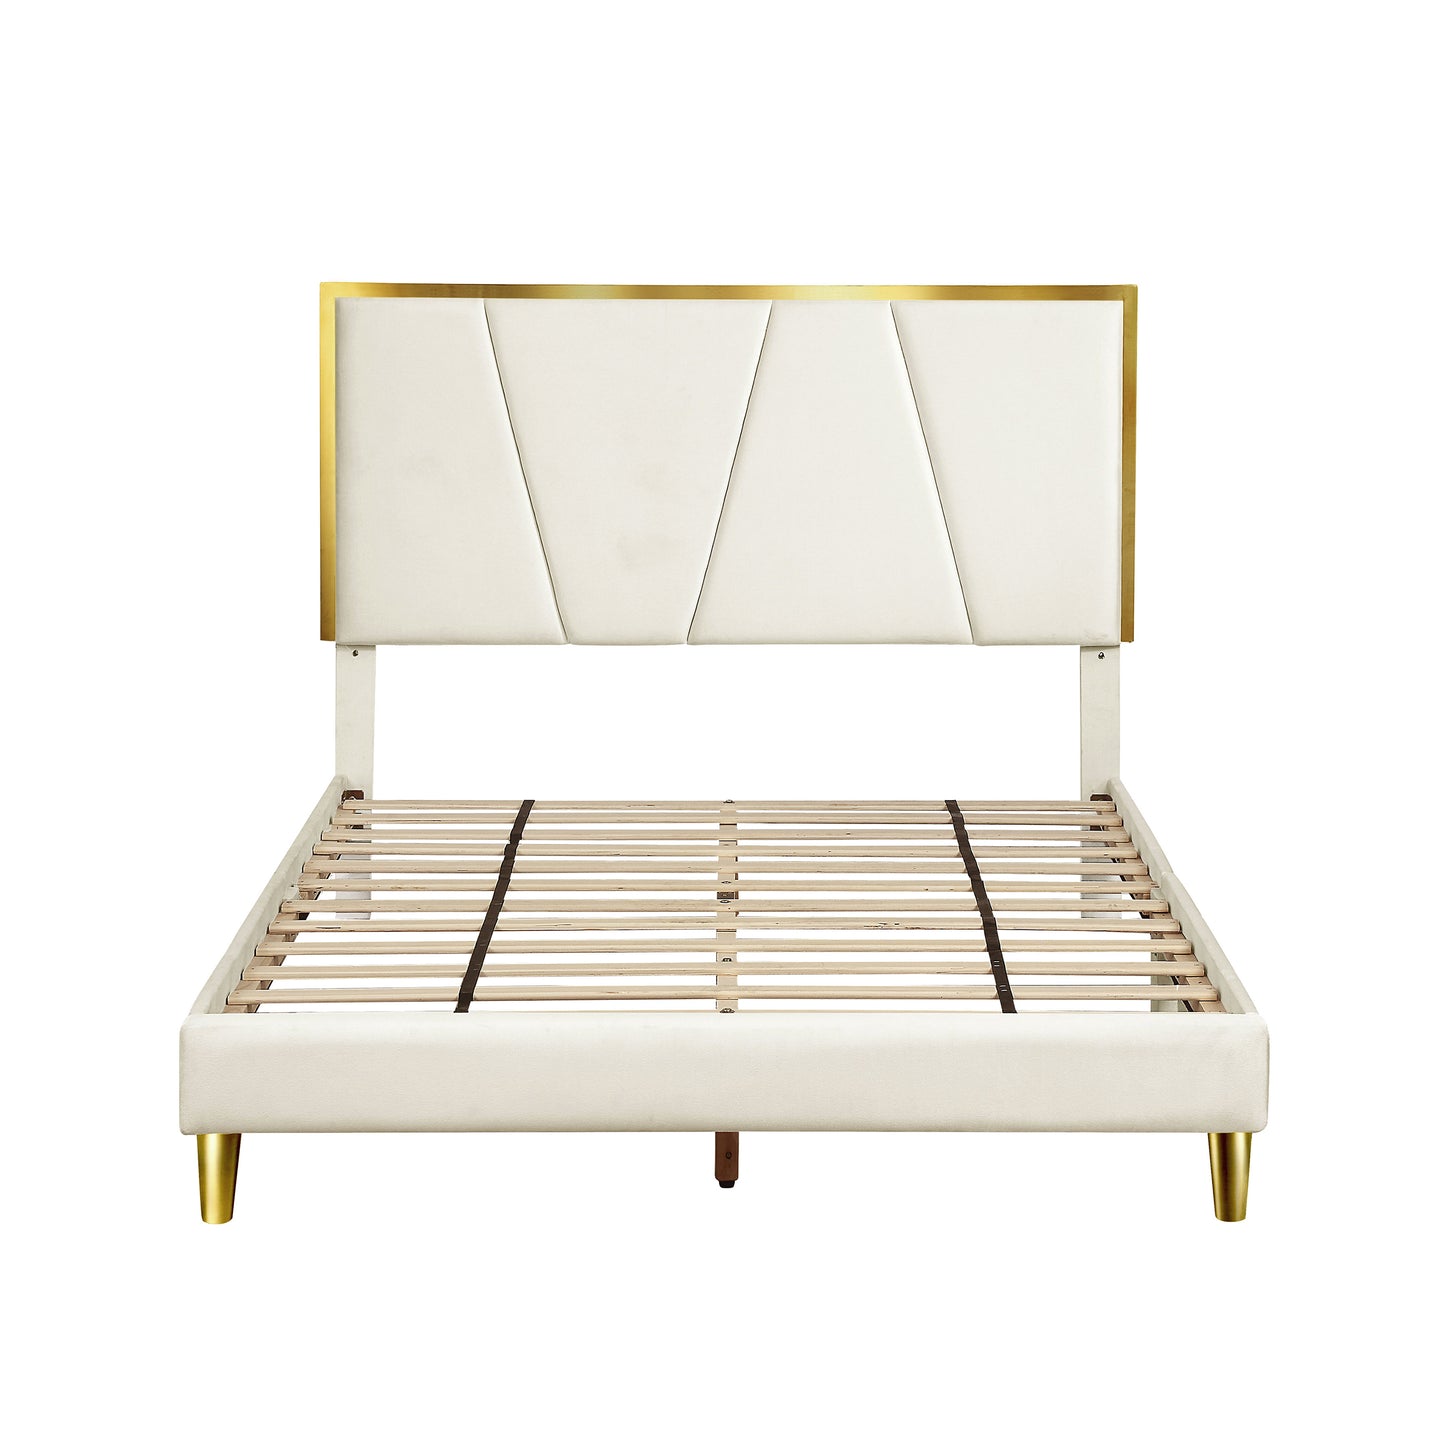 Front-facing contemporary beige and gold upholstered eastern king bed with slats shown on a white background